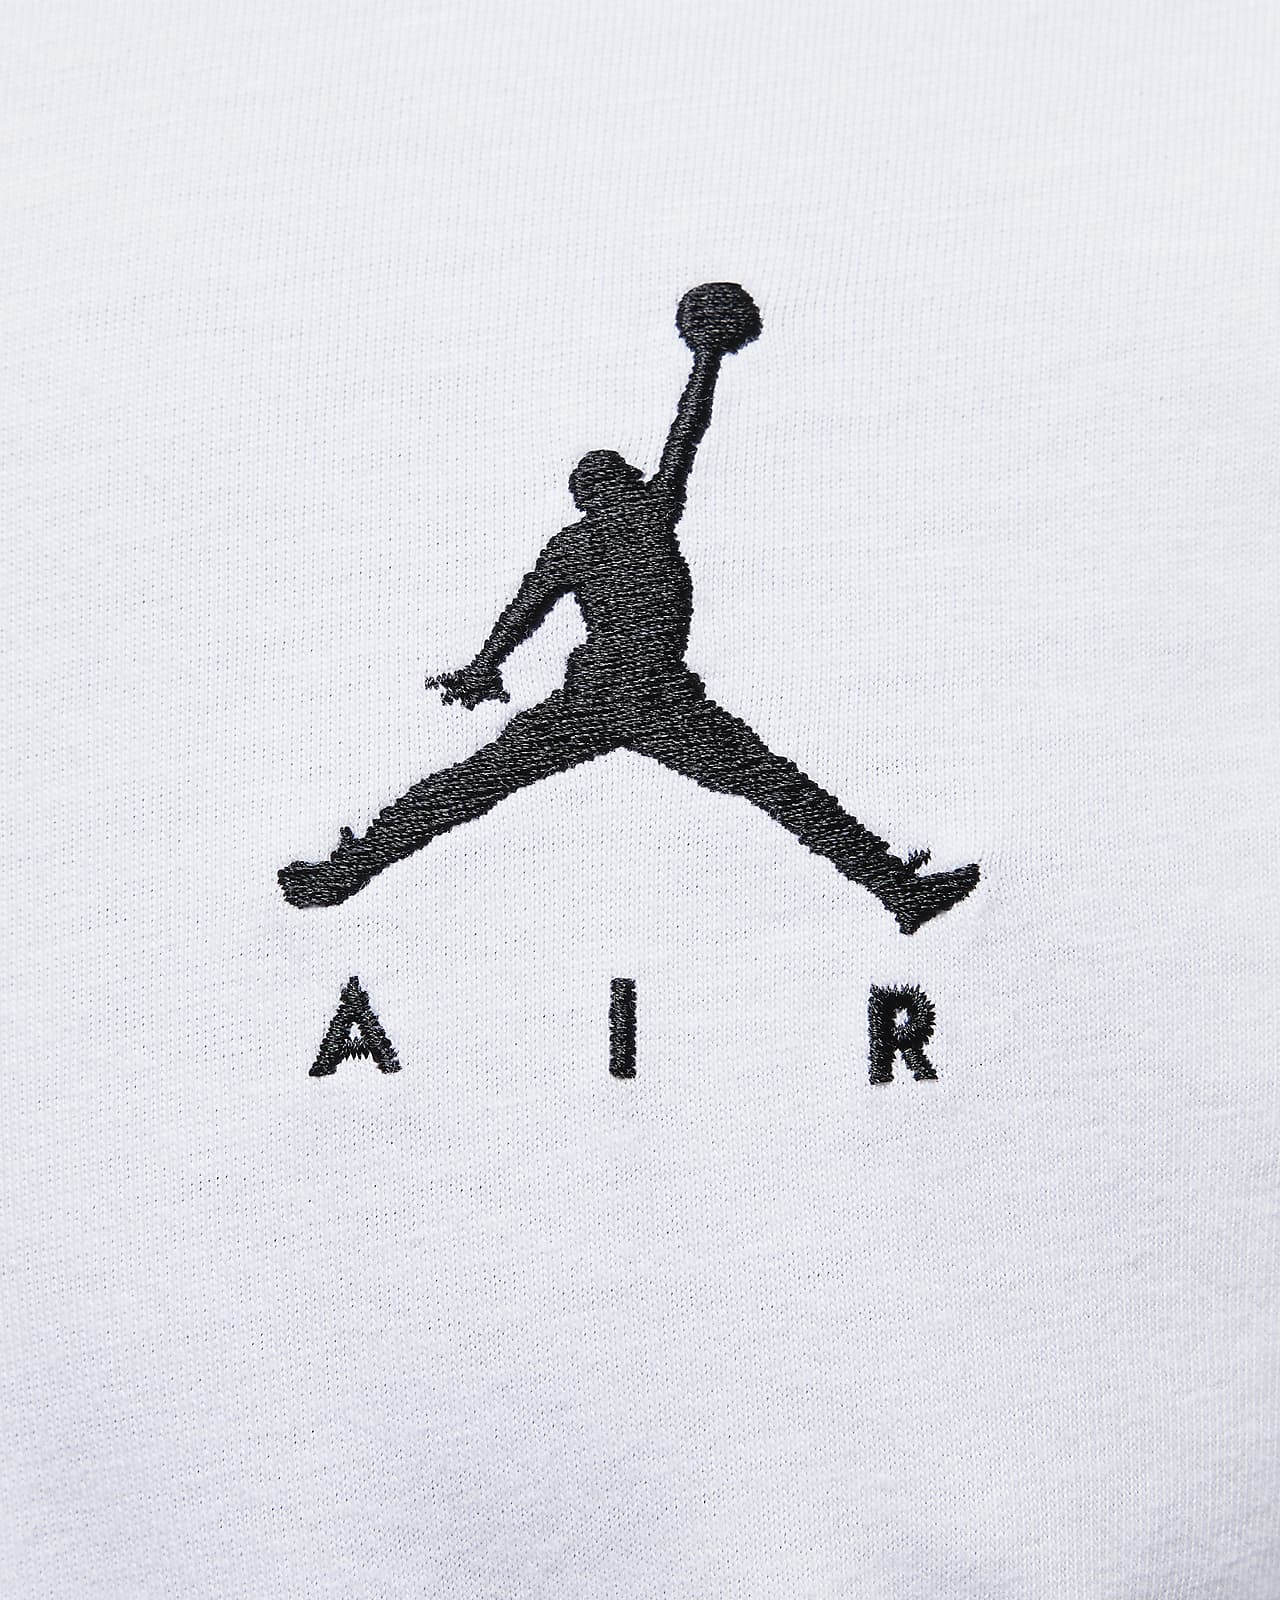 is jumpman owned by nike